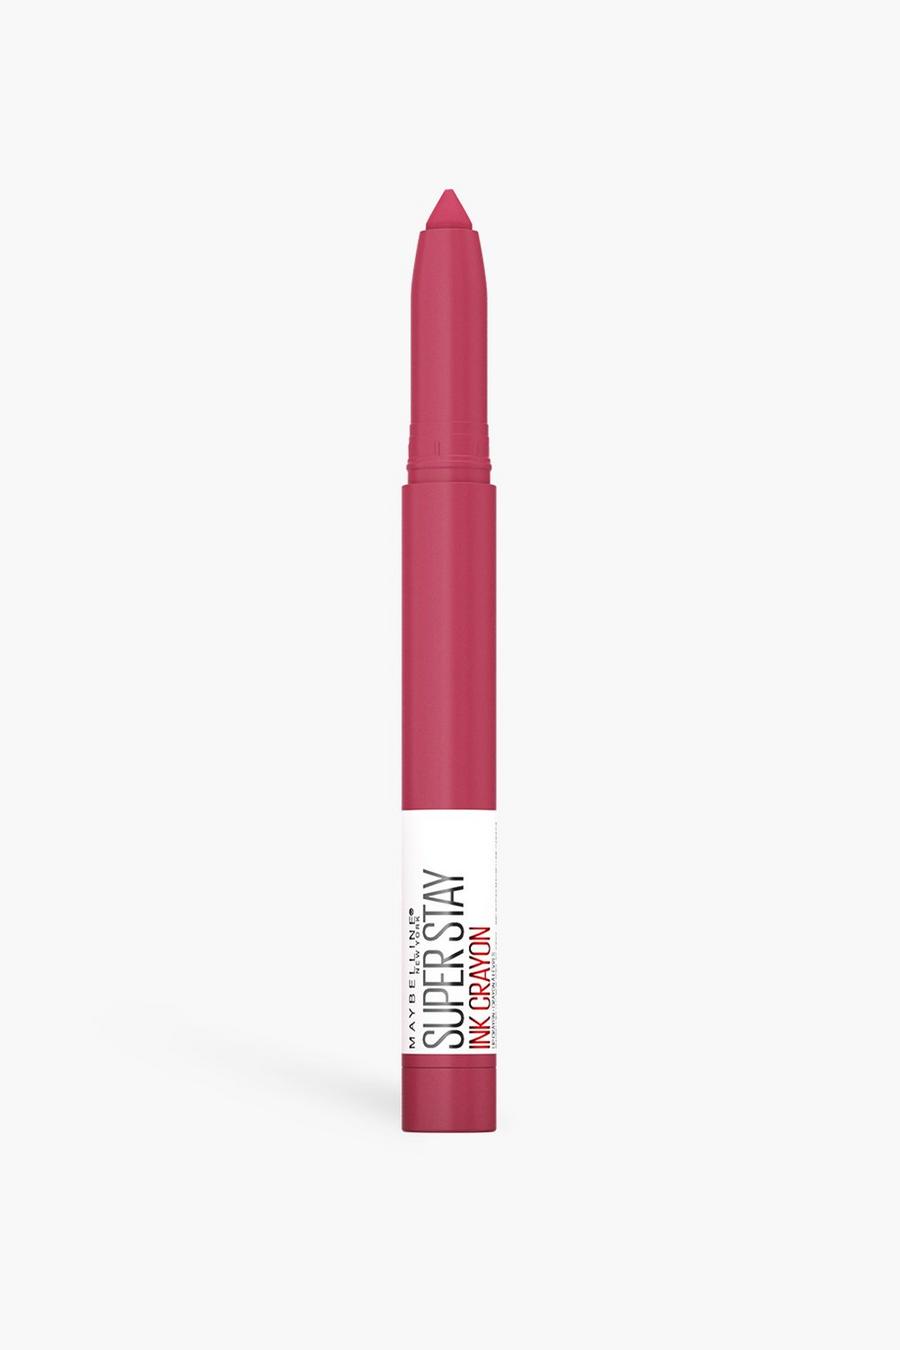 Maybelline - Rossetto Superstay Matte Crayon, 80 run the world